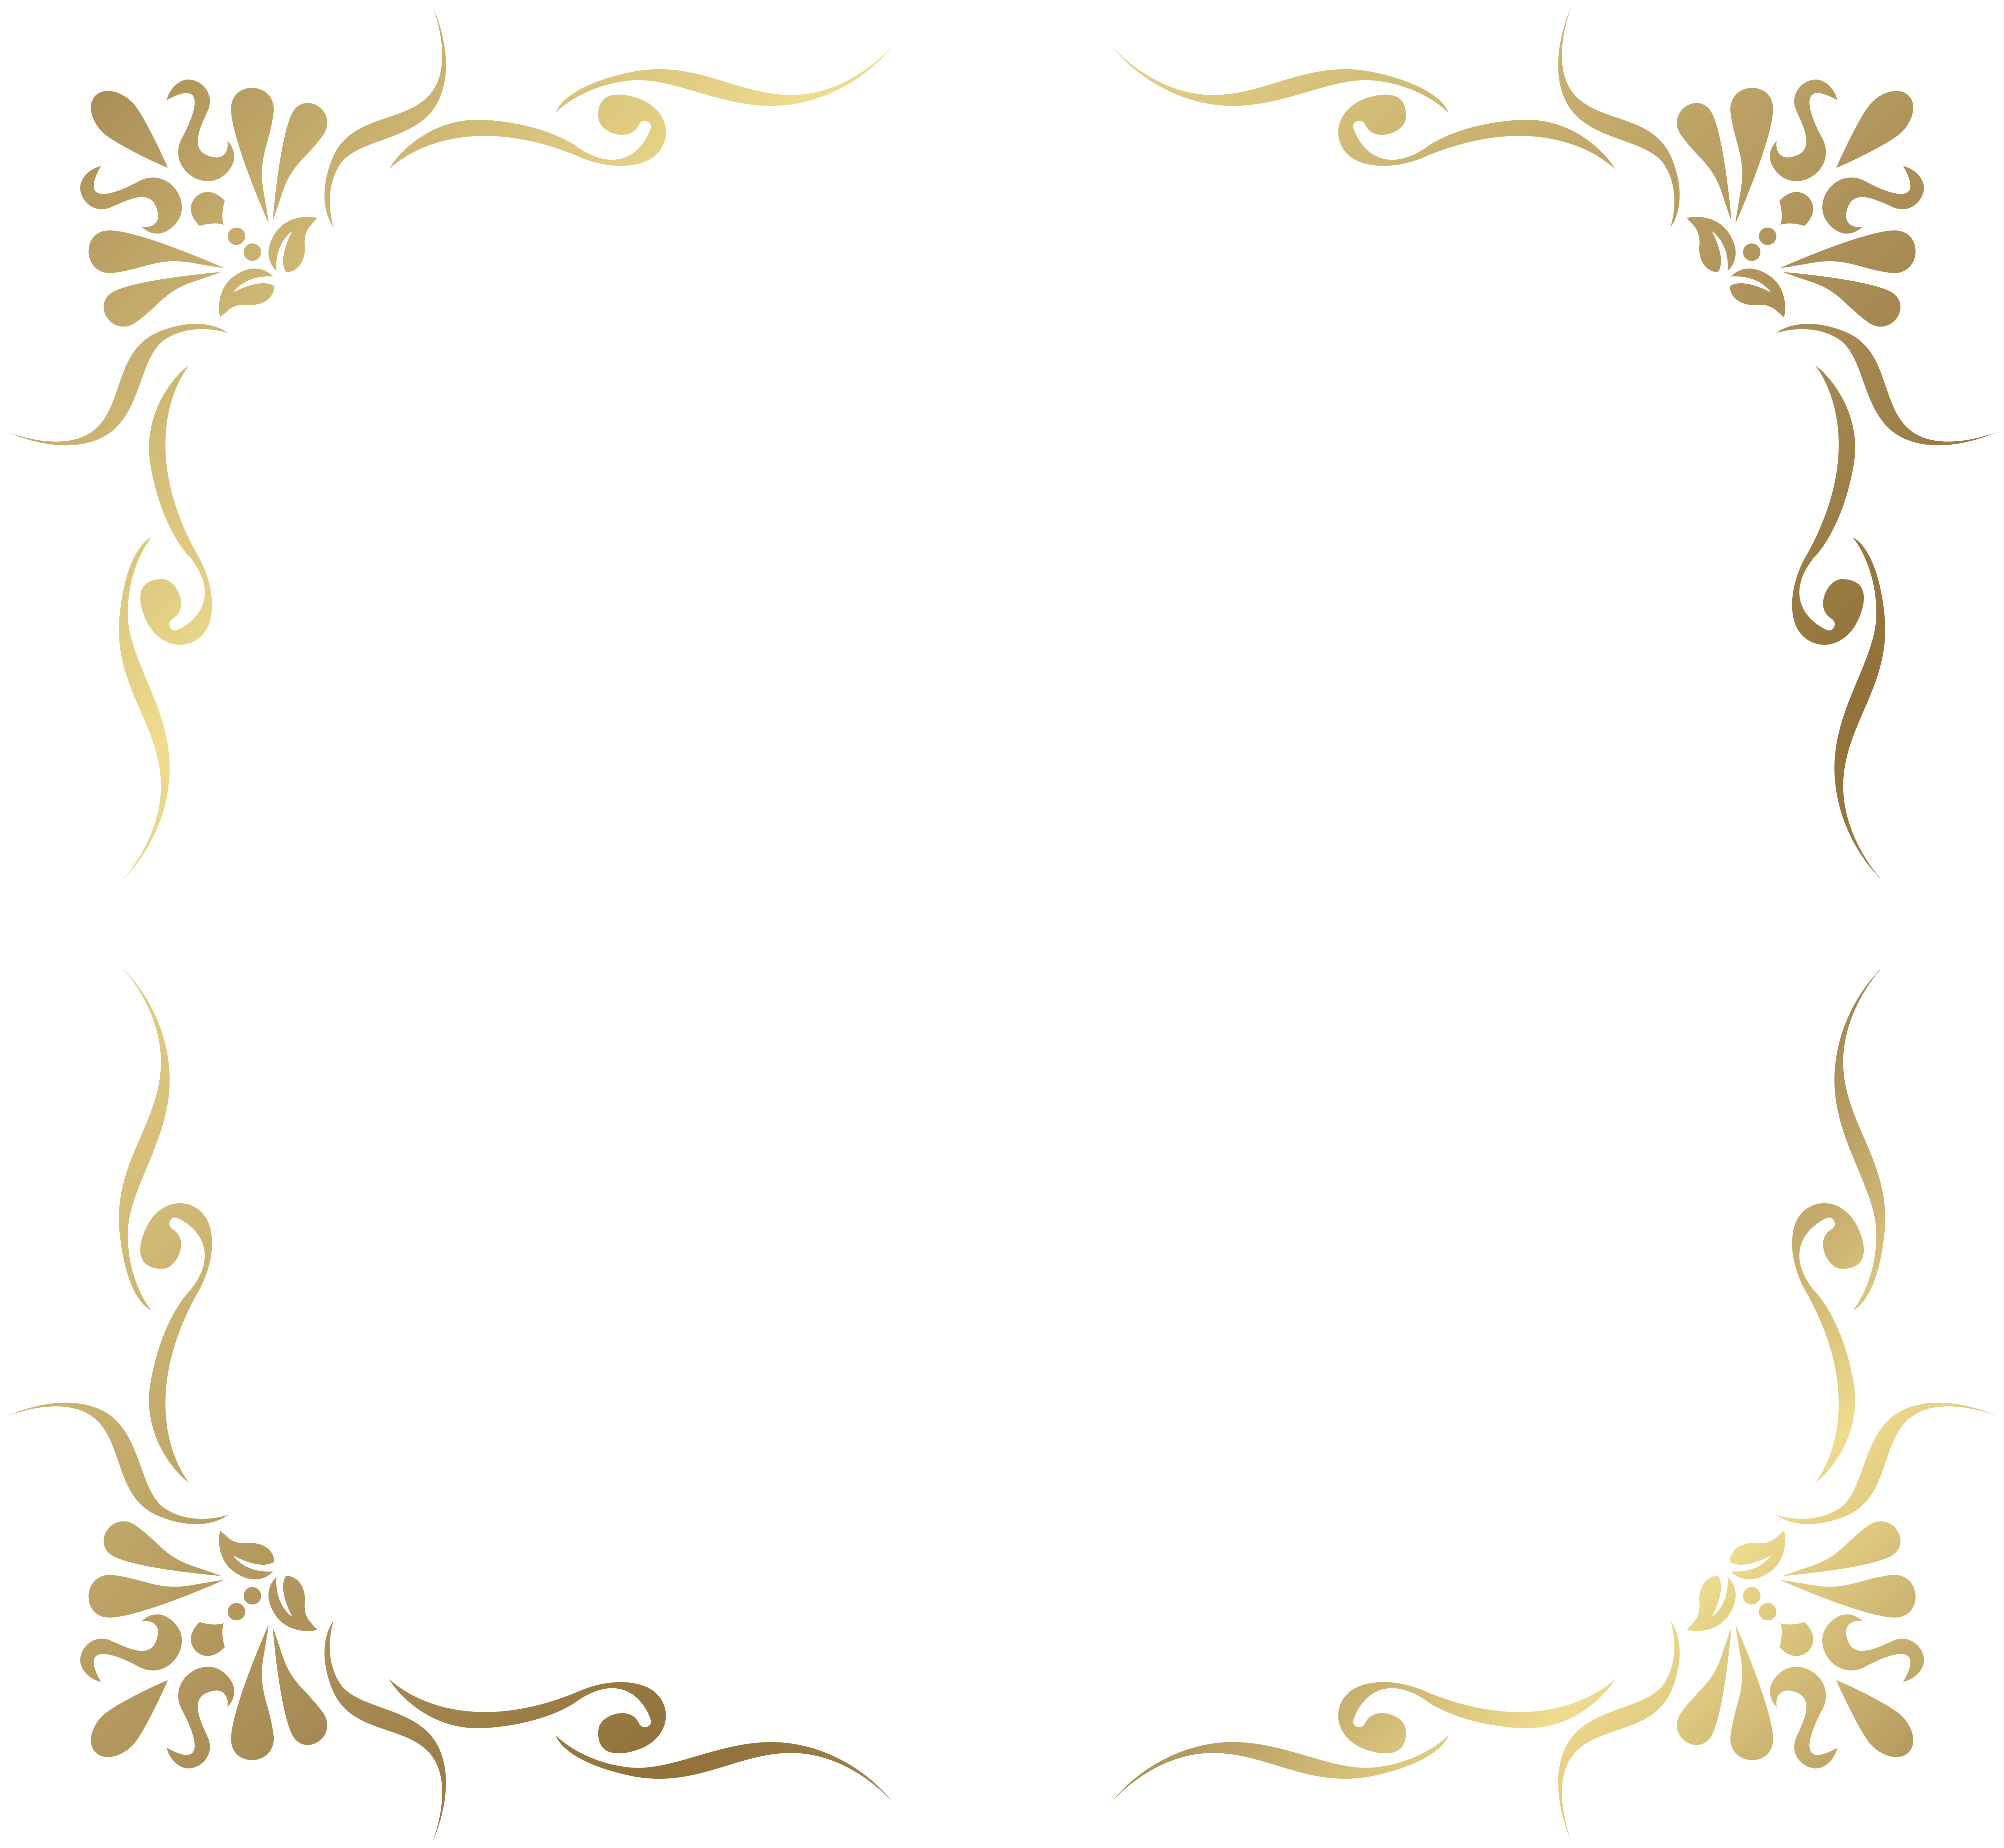 Decorative border png. Transparent frame picture gallery